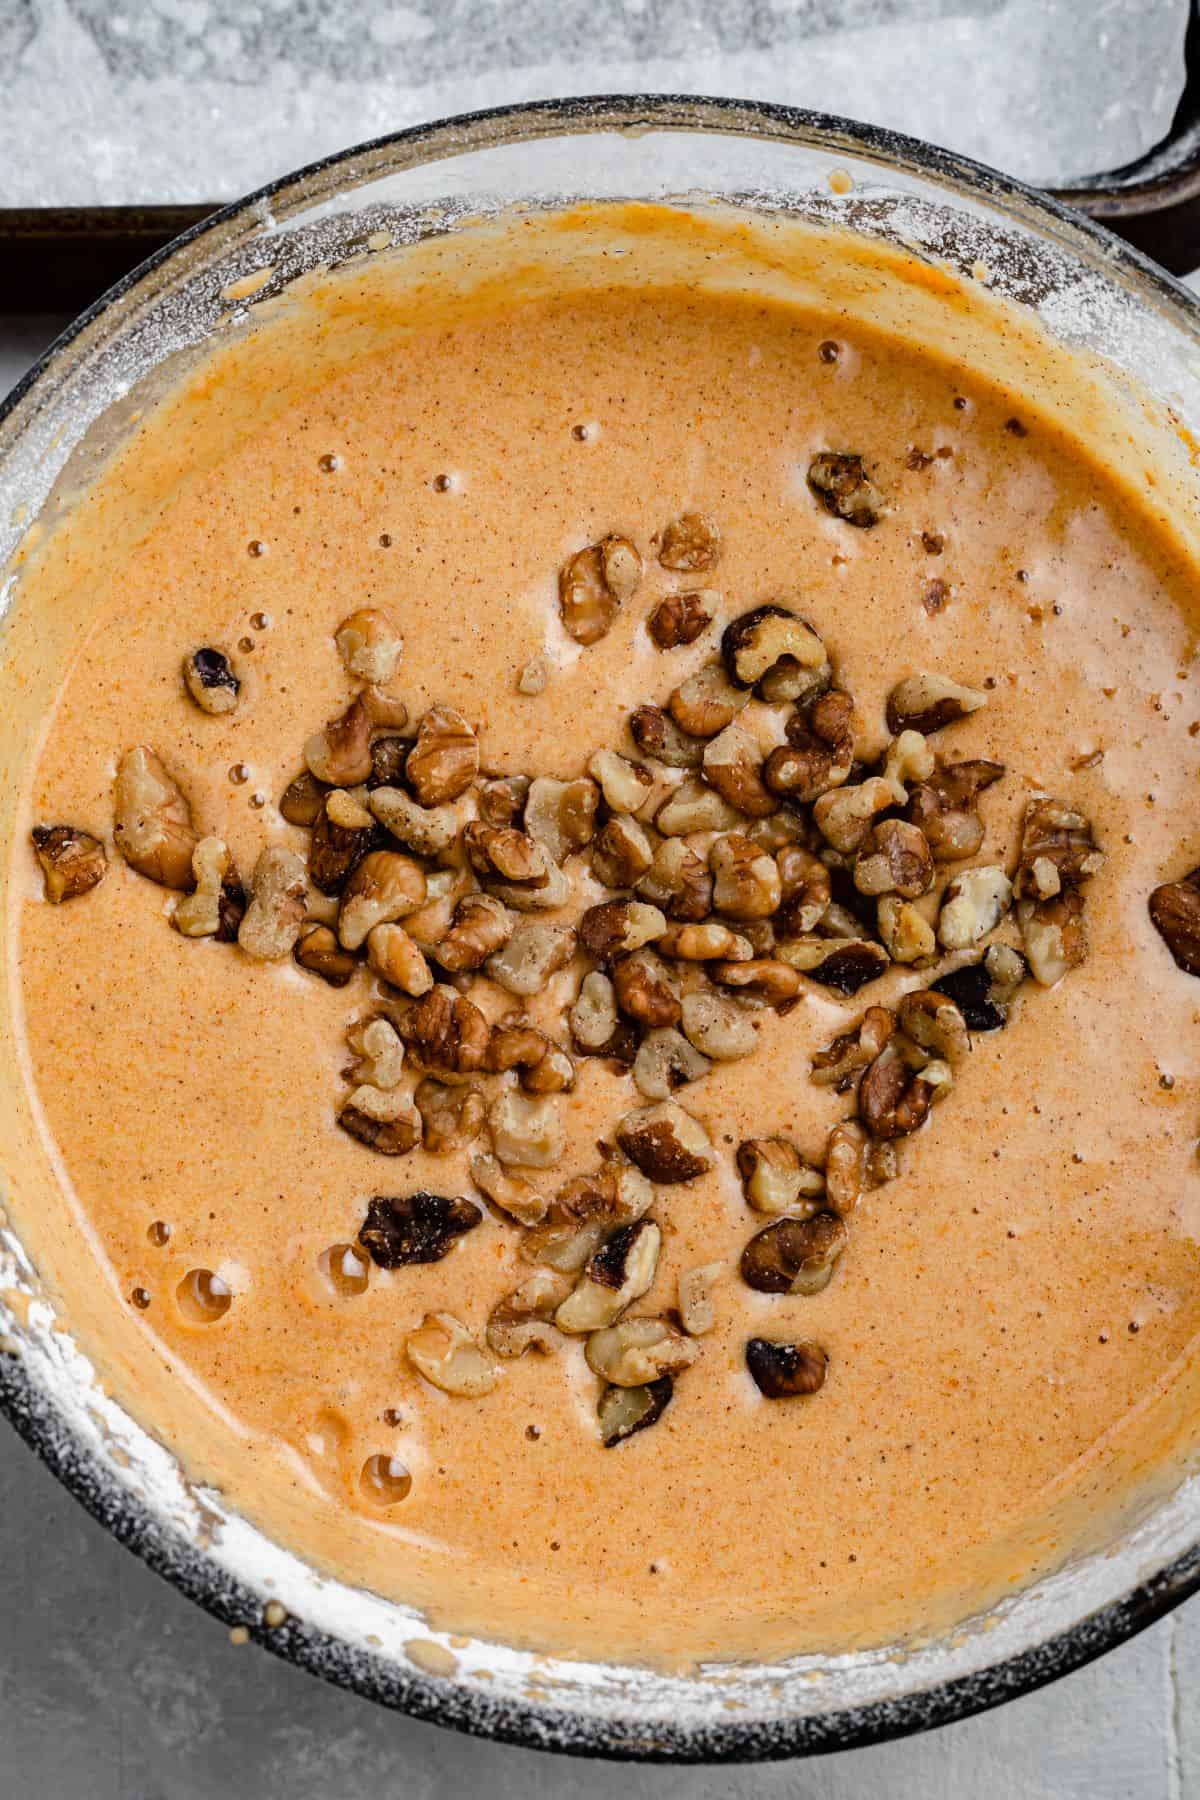 A mixing bowl full of pumpkin cake batter, with chopped walnuts sprinkled on the surface of the batter.